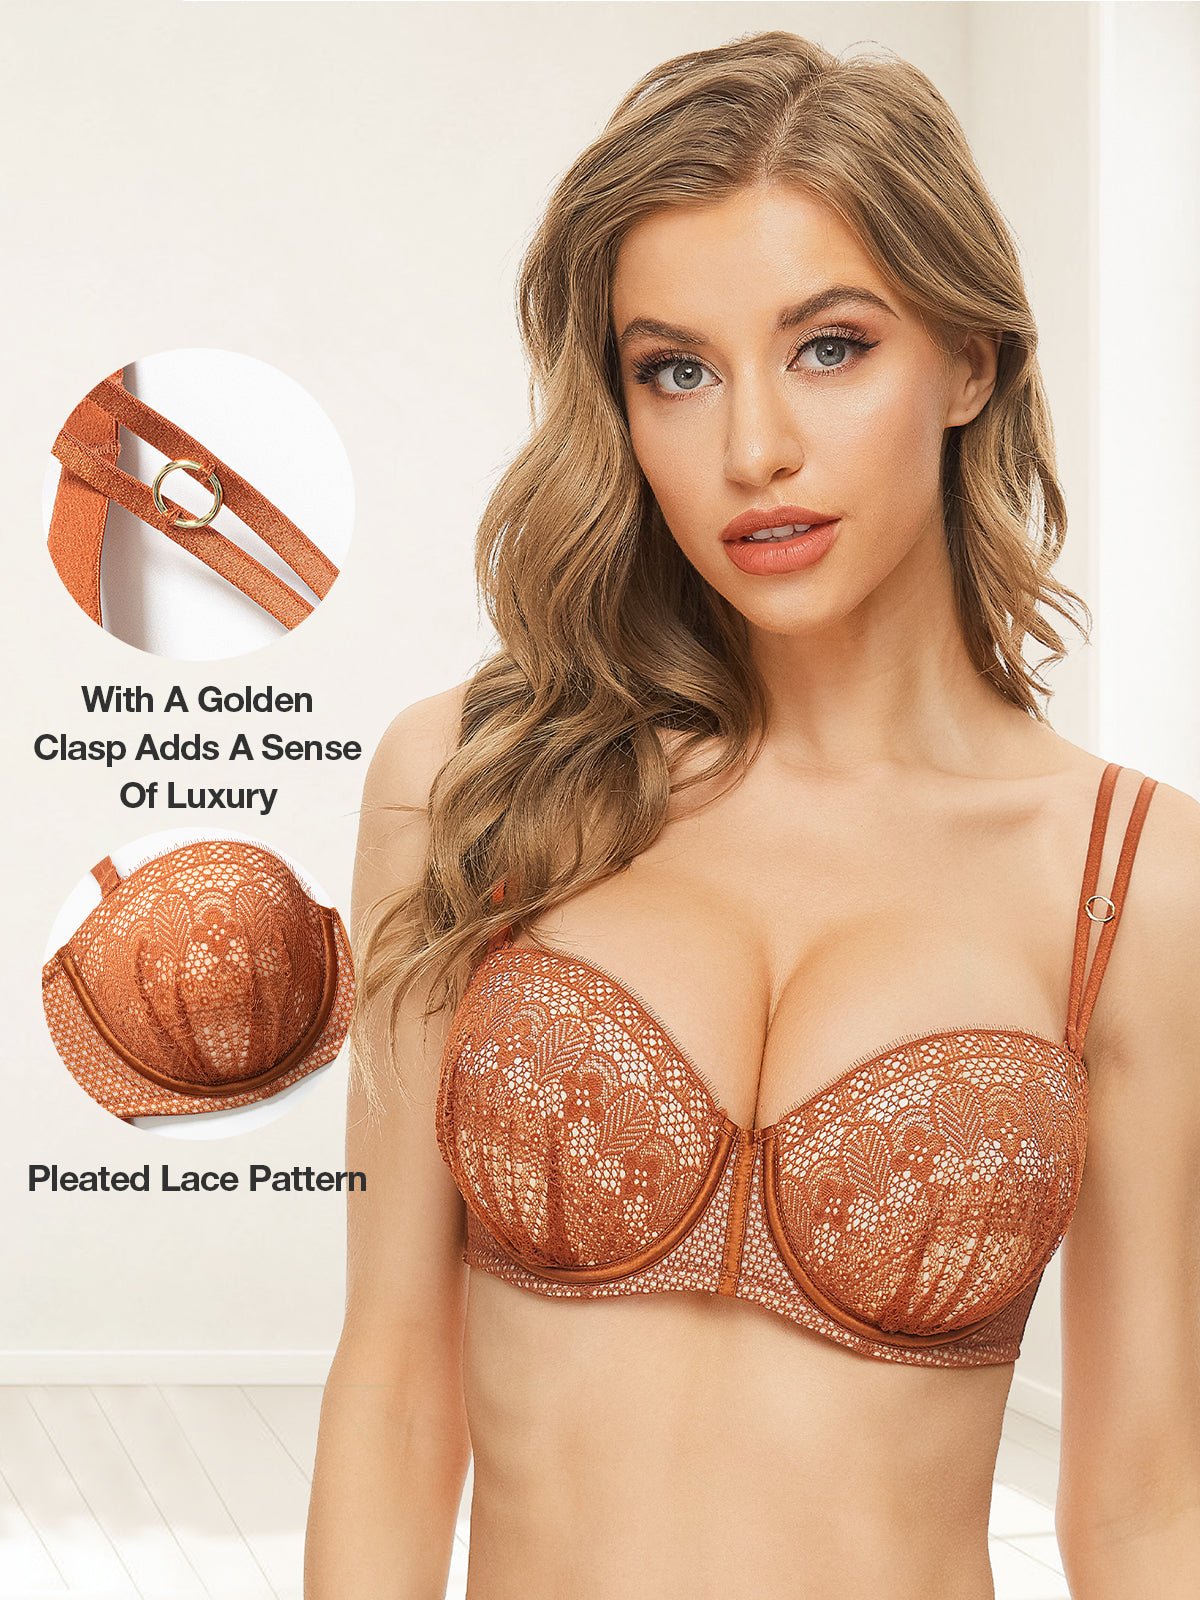 Push Up Bra Full Figure Strapless Pleated Lace Multiway Bra